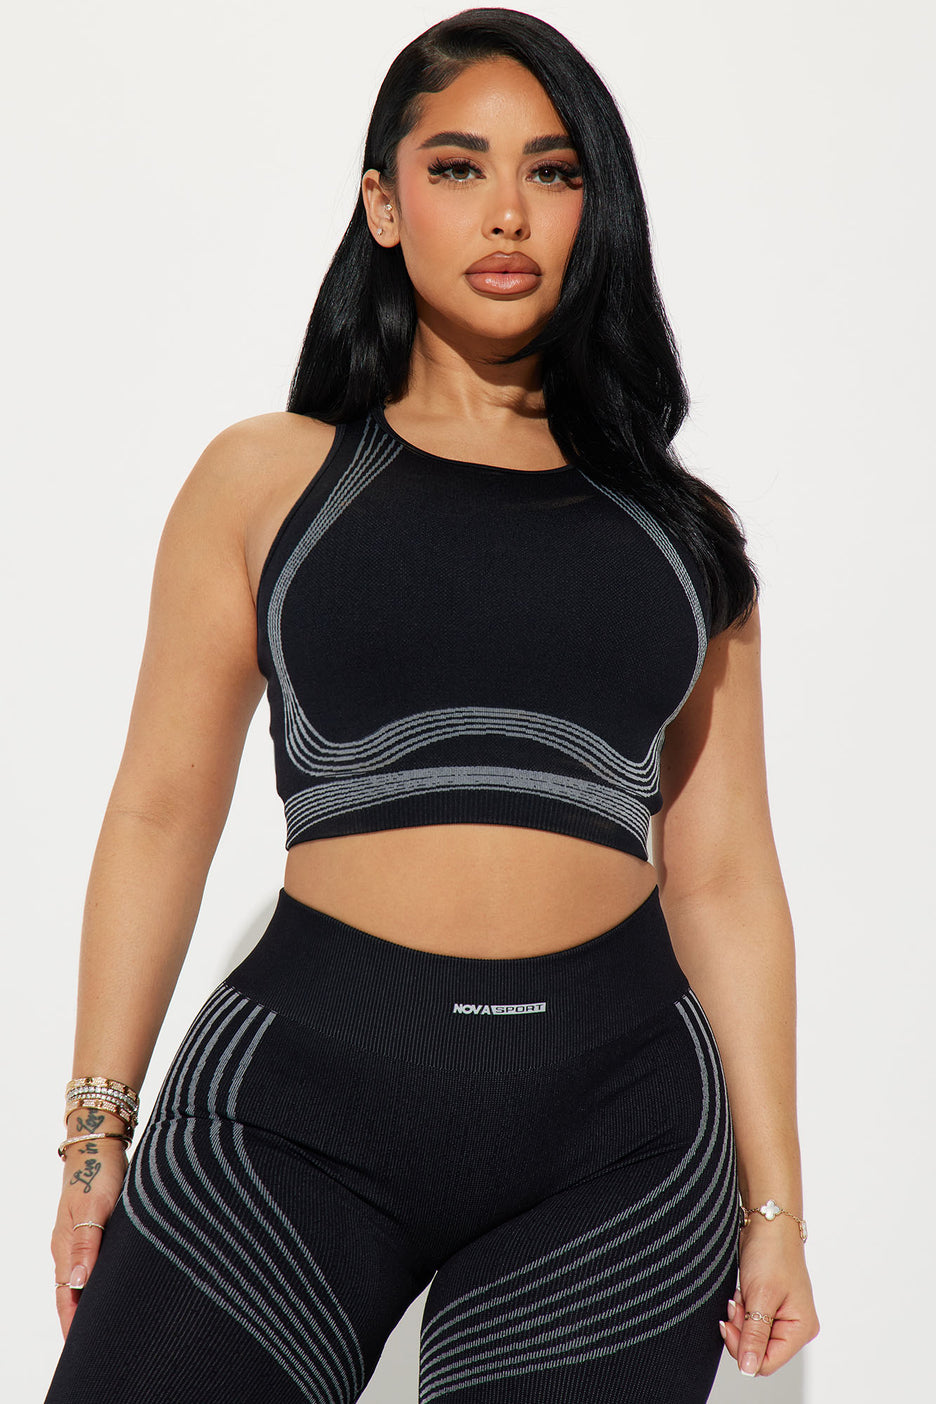 The Top 8 Fashion Nova Athleisure Wear Looks to Invest in This Season 1 2